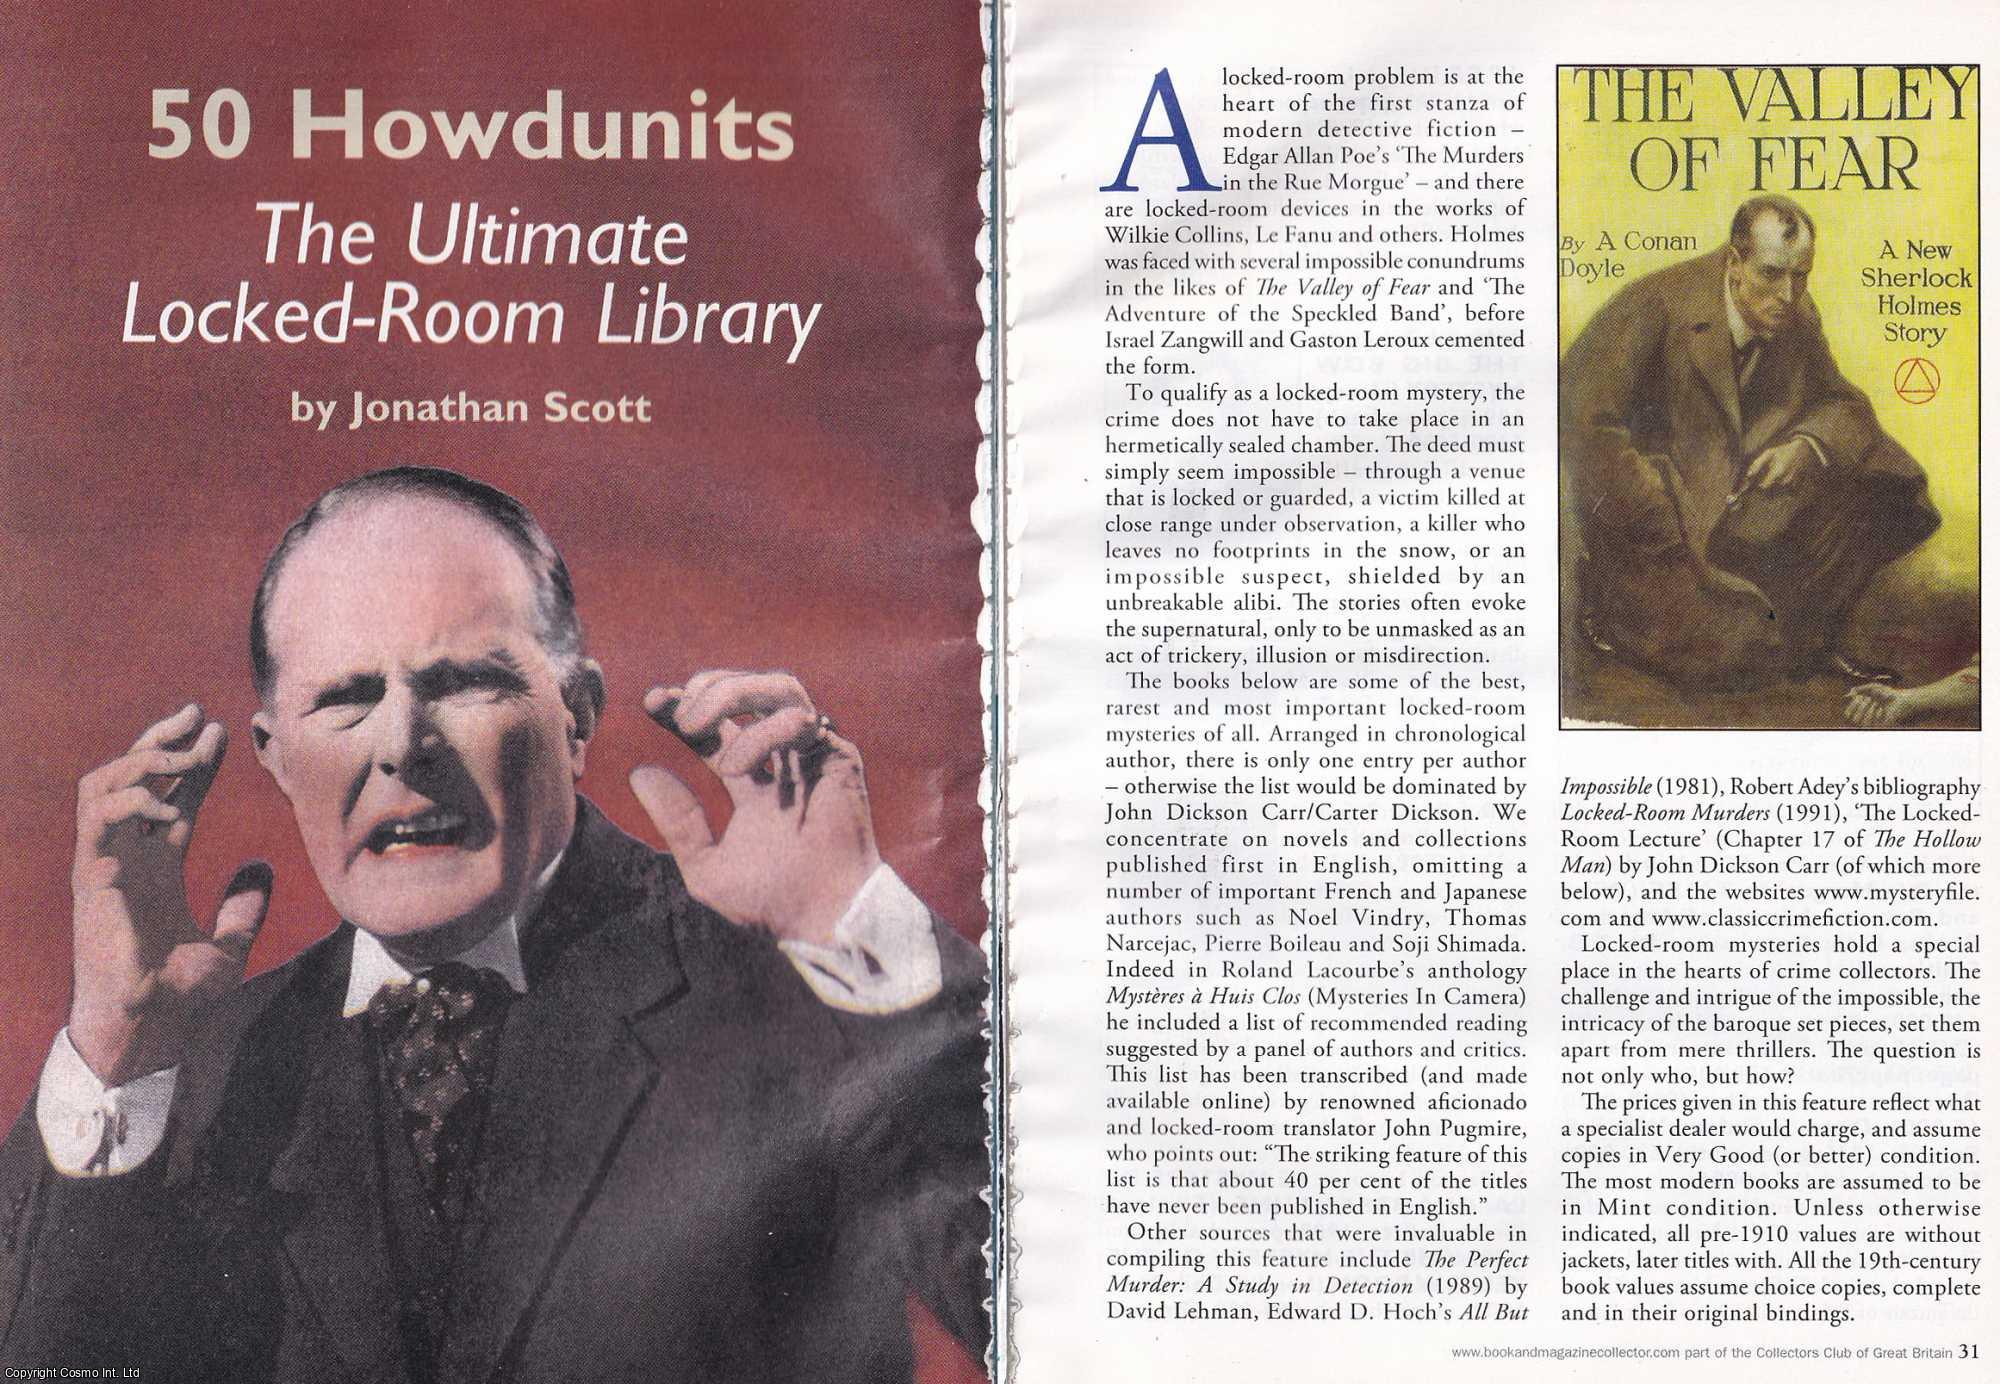 Jonathan Scott - 50 Howdunits. The Ultimate Locked-Room Library. This is an original article separated from an issue of The Book & Magazine Collector publication.